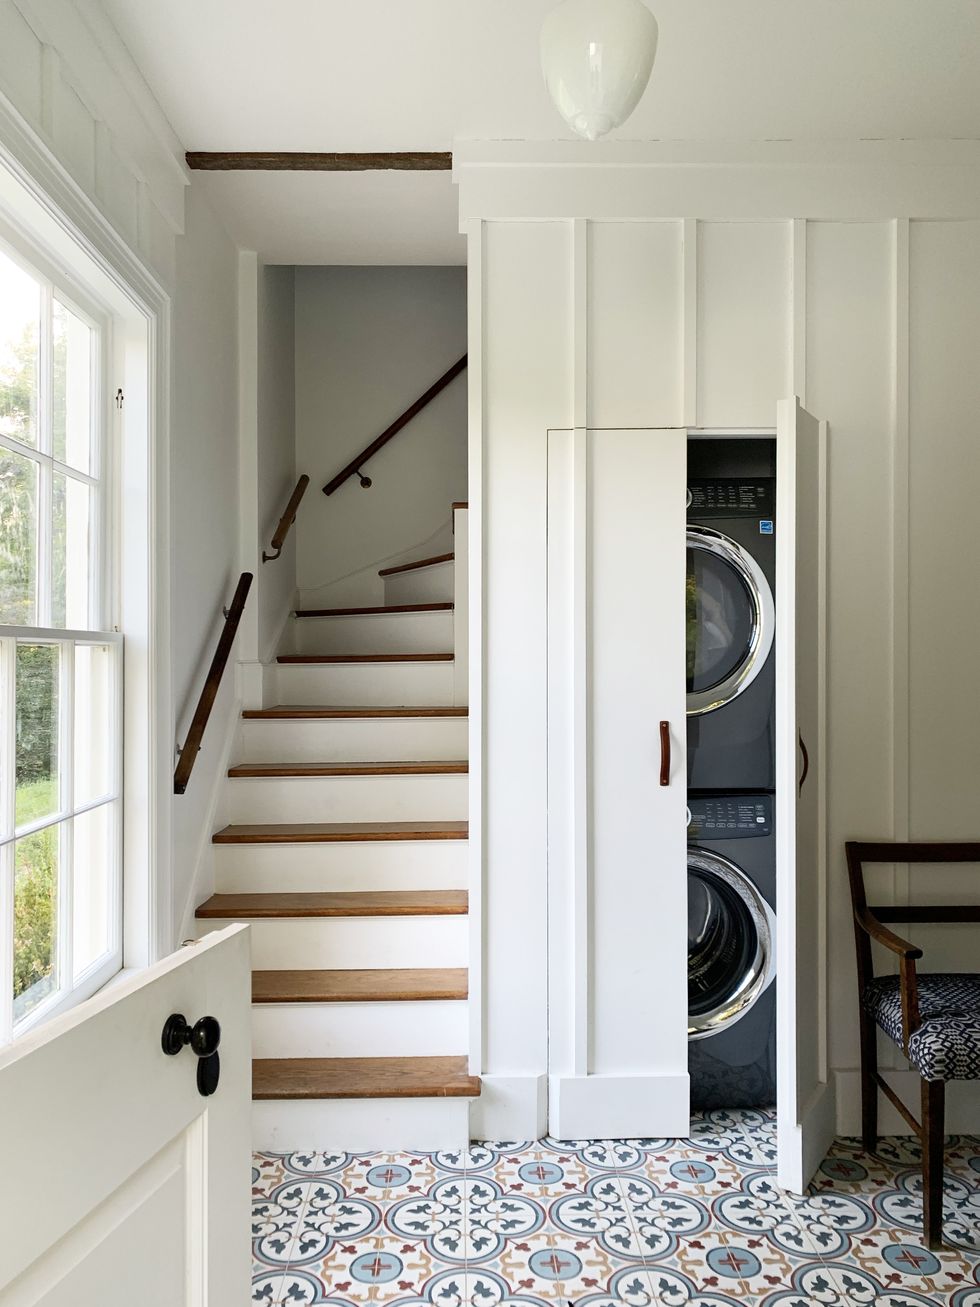 15 laundry room organization ideas to try - TODAY